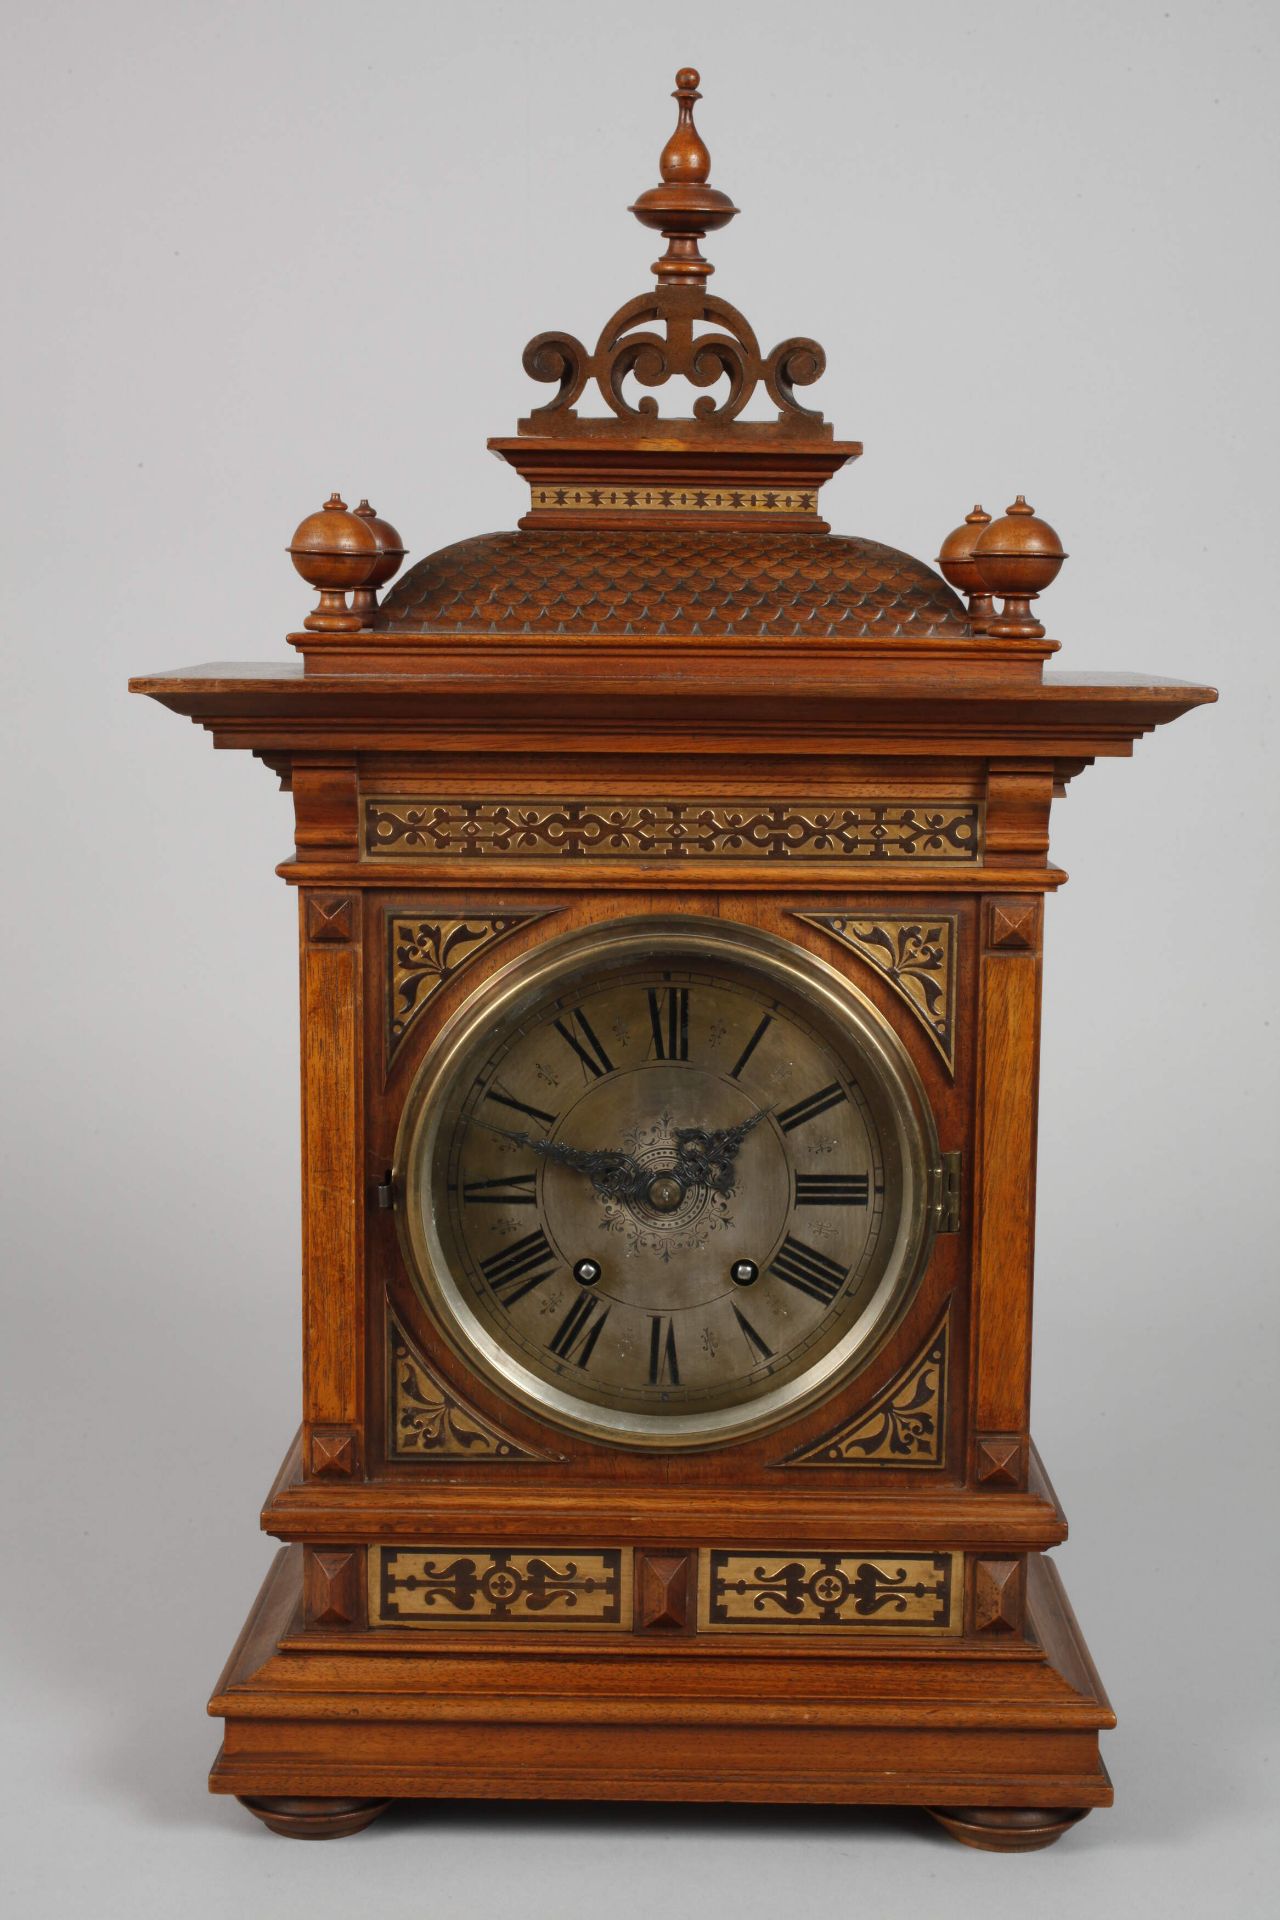 Founding period table clock LFS - Image 2 of 8